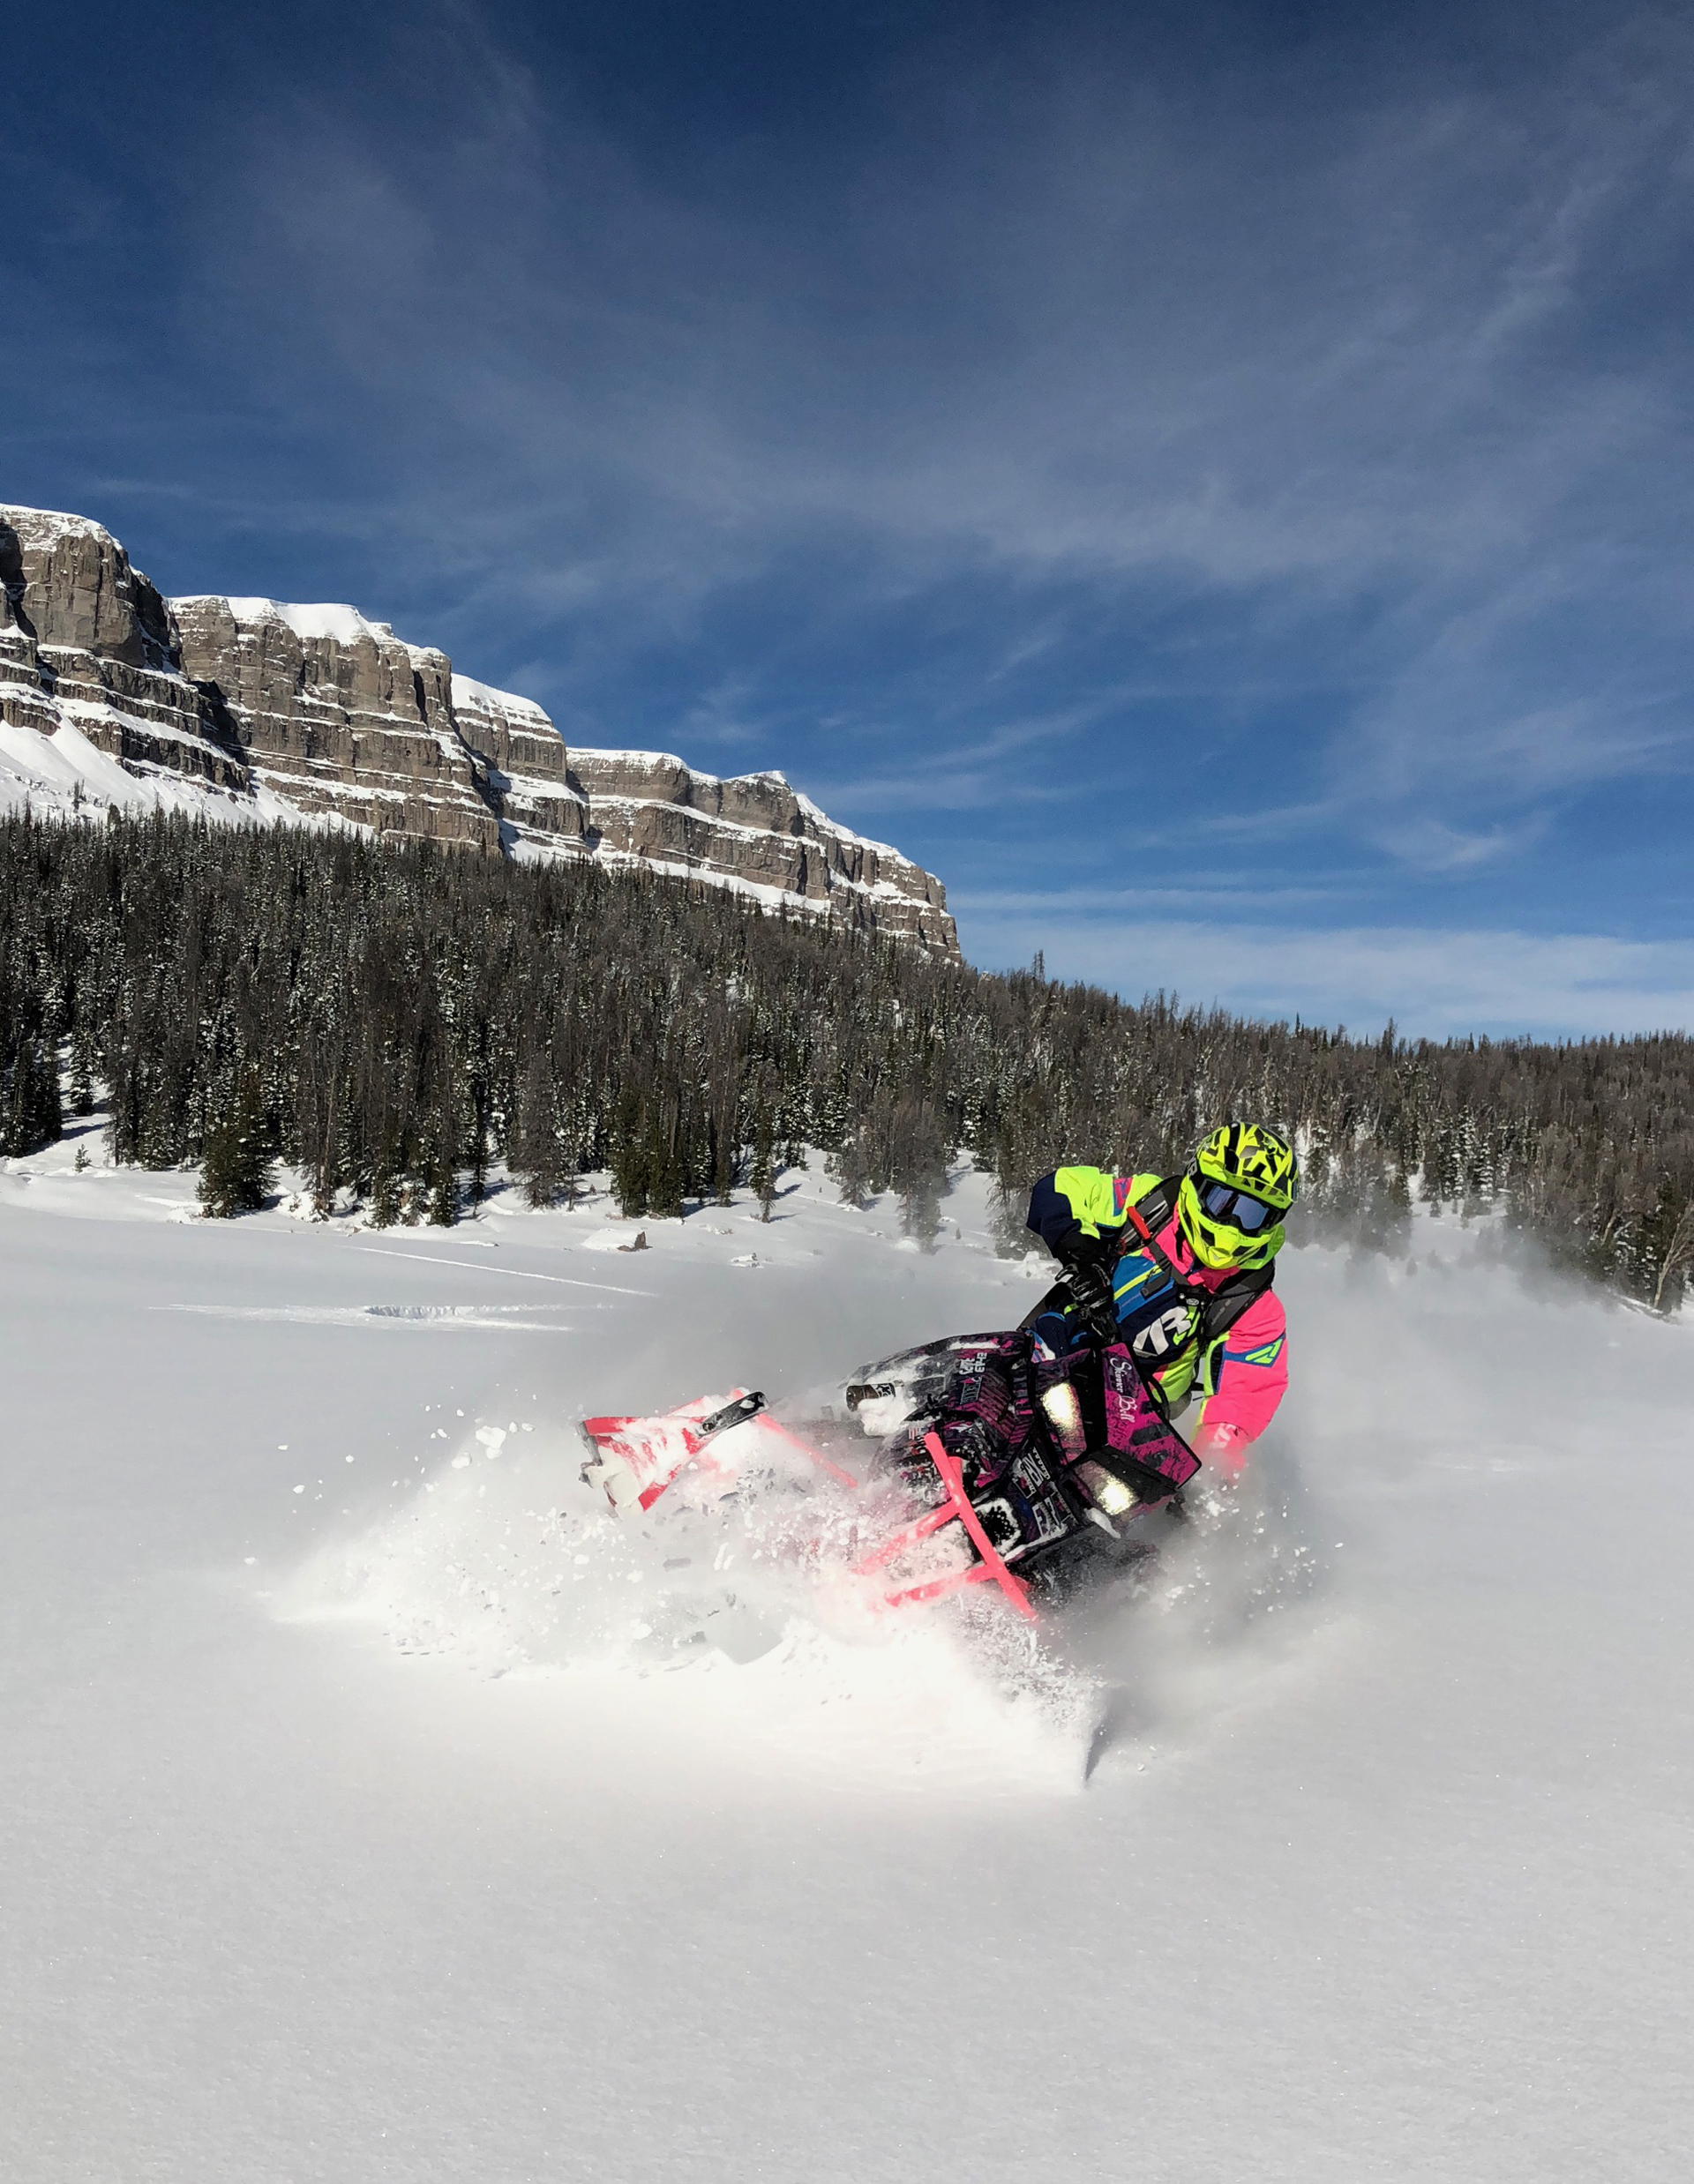 Snowmobilers enjoy the 2 million acres of scenic Shoshone National Forest backcountry riding and 600 miles of groomed trails surrounding Brooks Lake Lodge.